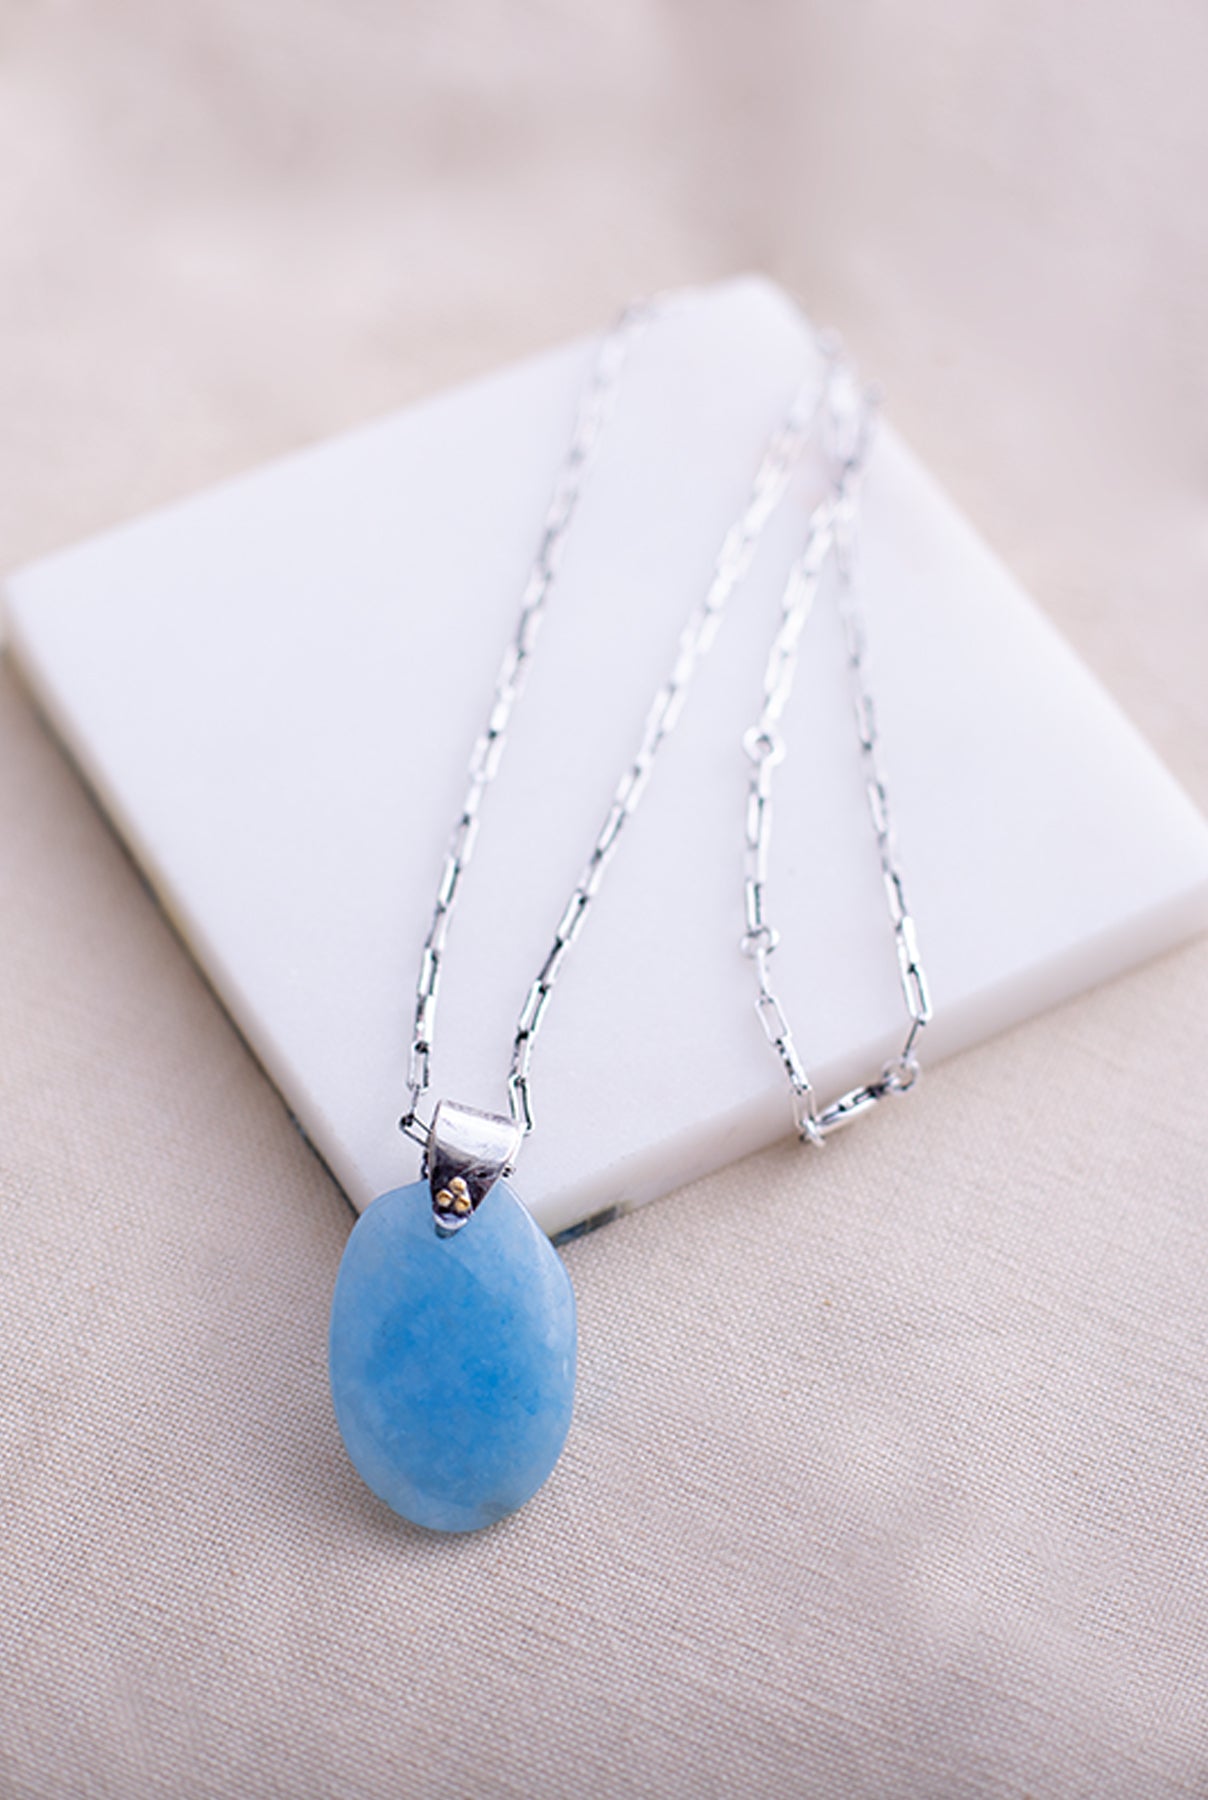 The Blue Jade Necklace